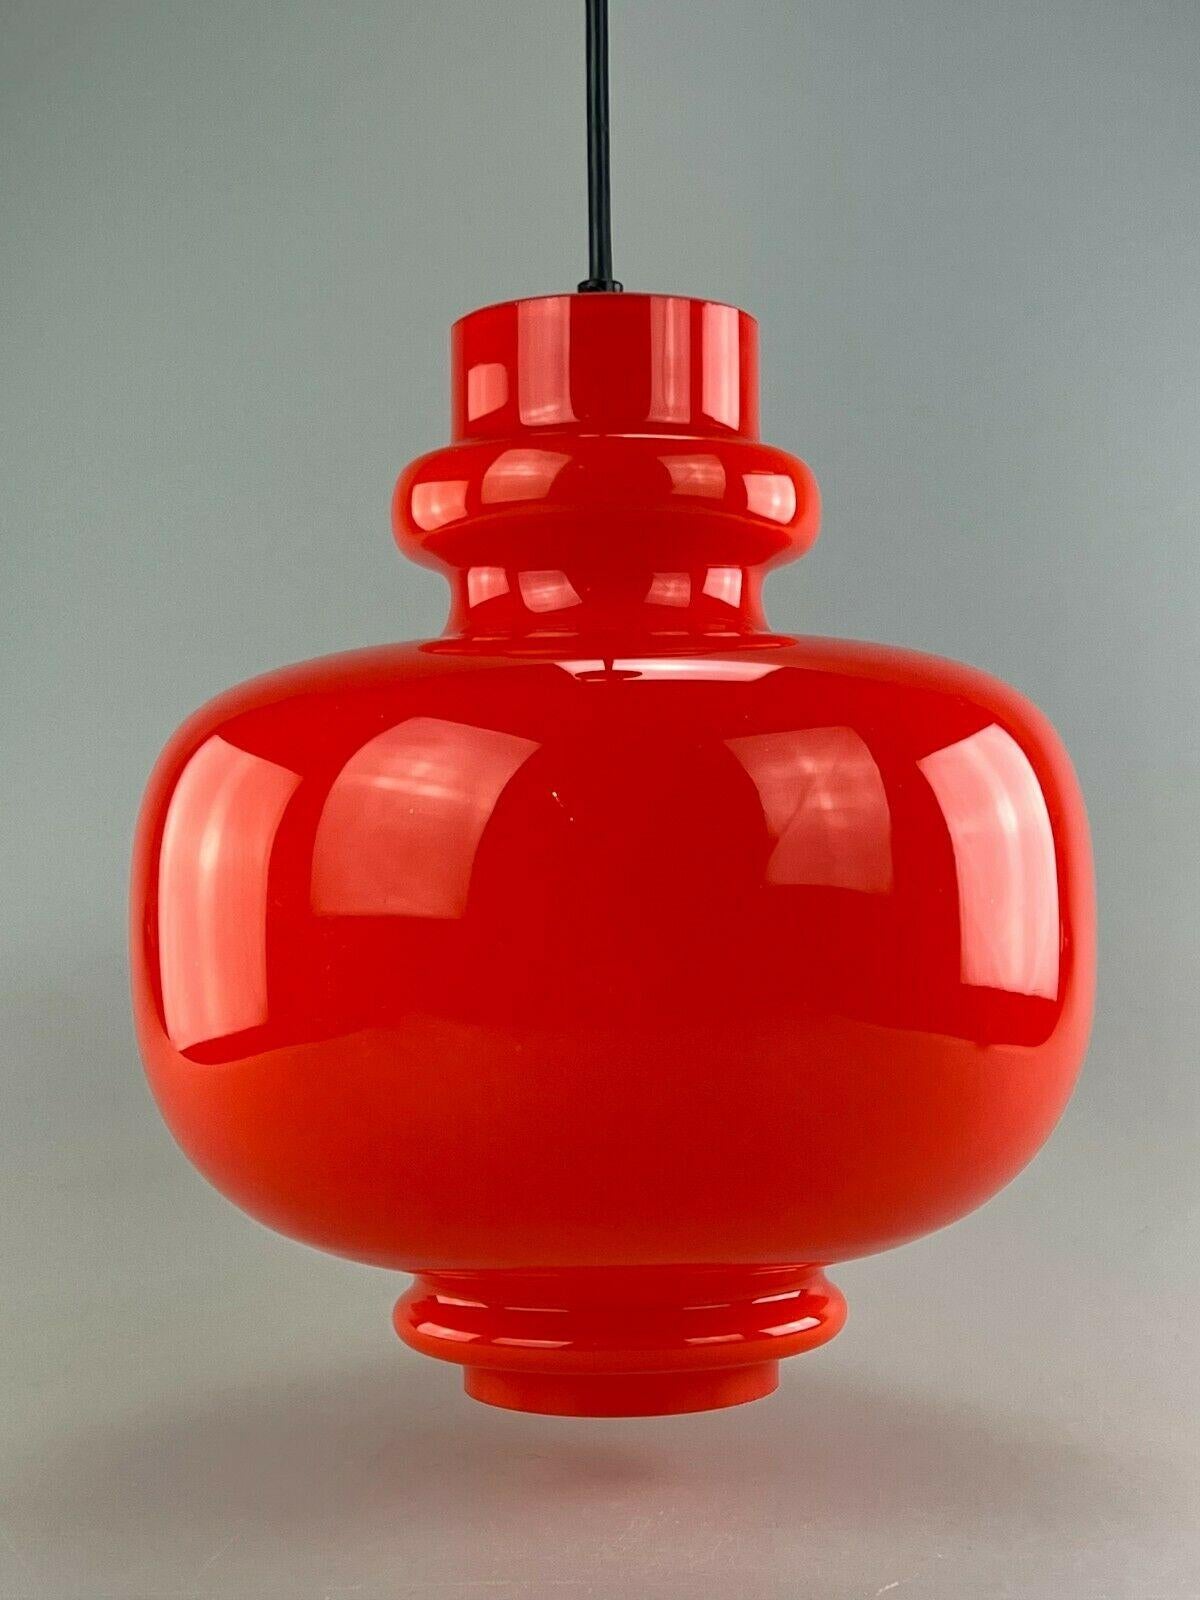 60s 70s lamp light pendant lamp Hans Agne Jakobsson for Staff 60s 70s

Object: ceiling lamp

Manufacturer: Staff

Condition: good

Age: around 1960-1970

Dimensions:

Diameter = 28cm
Height = 31cm

Other notes:

The pictures serve